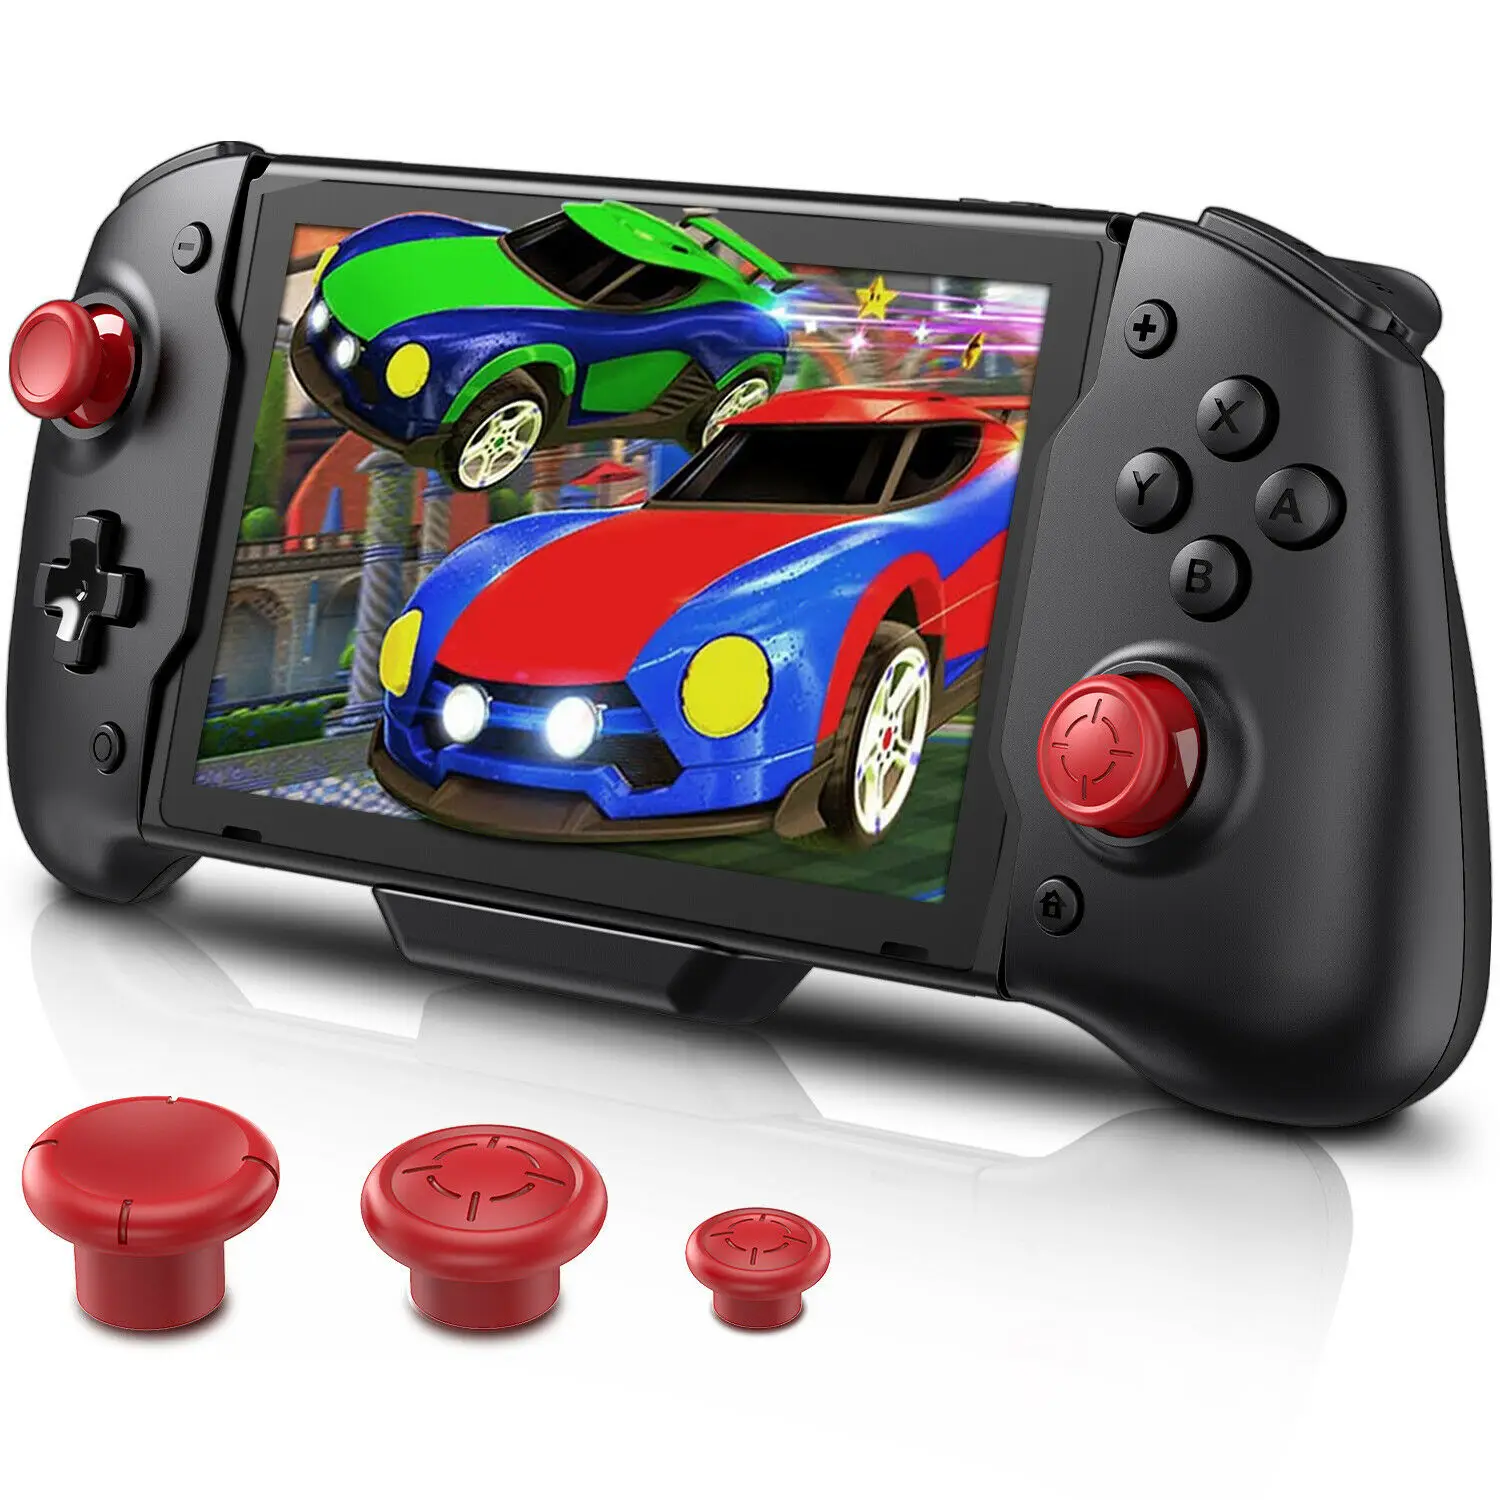 

Upgrade Joystick Joy Game Pad For Switch Wireless Gamepads Controller for Switch Console